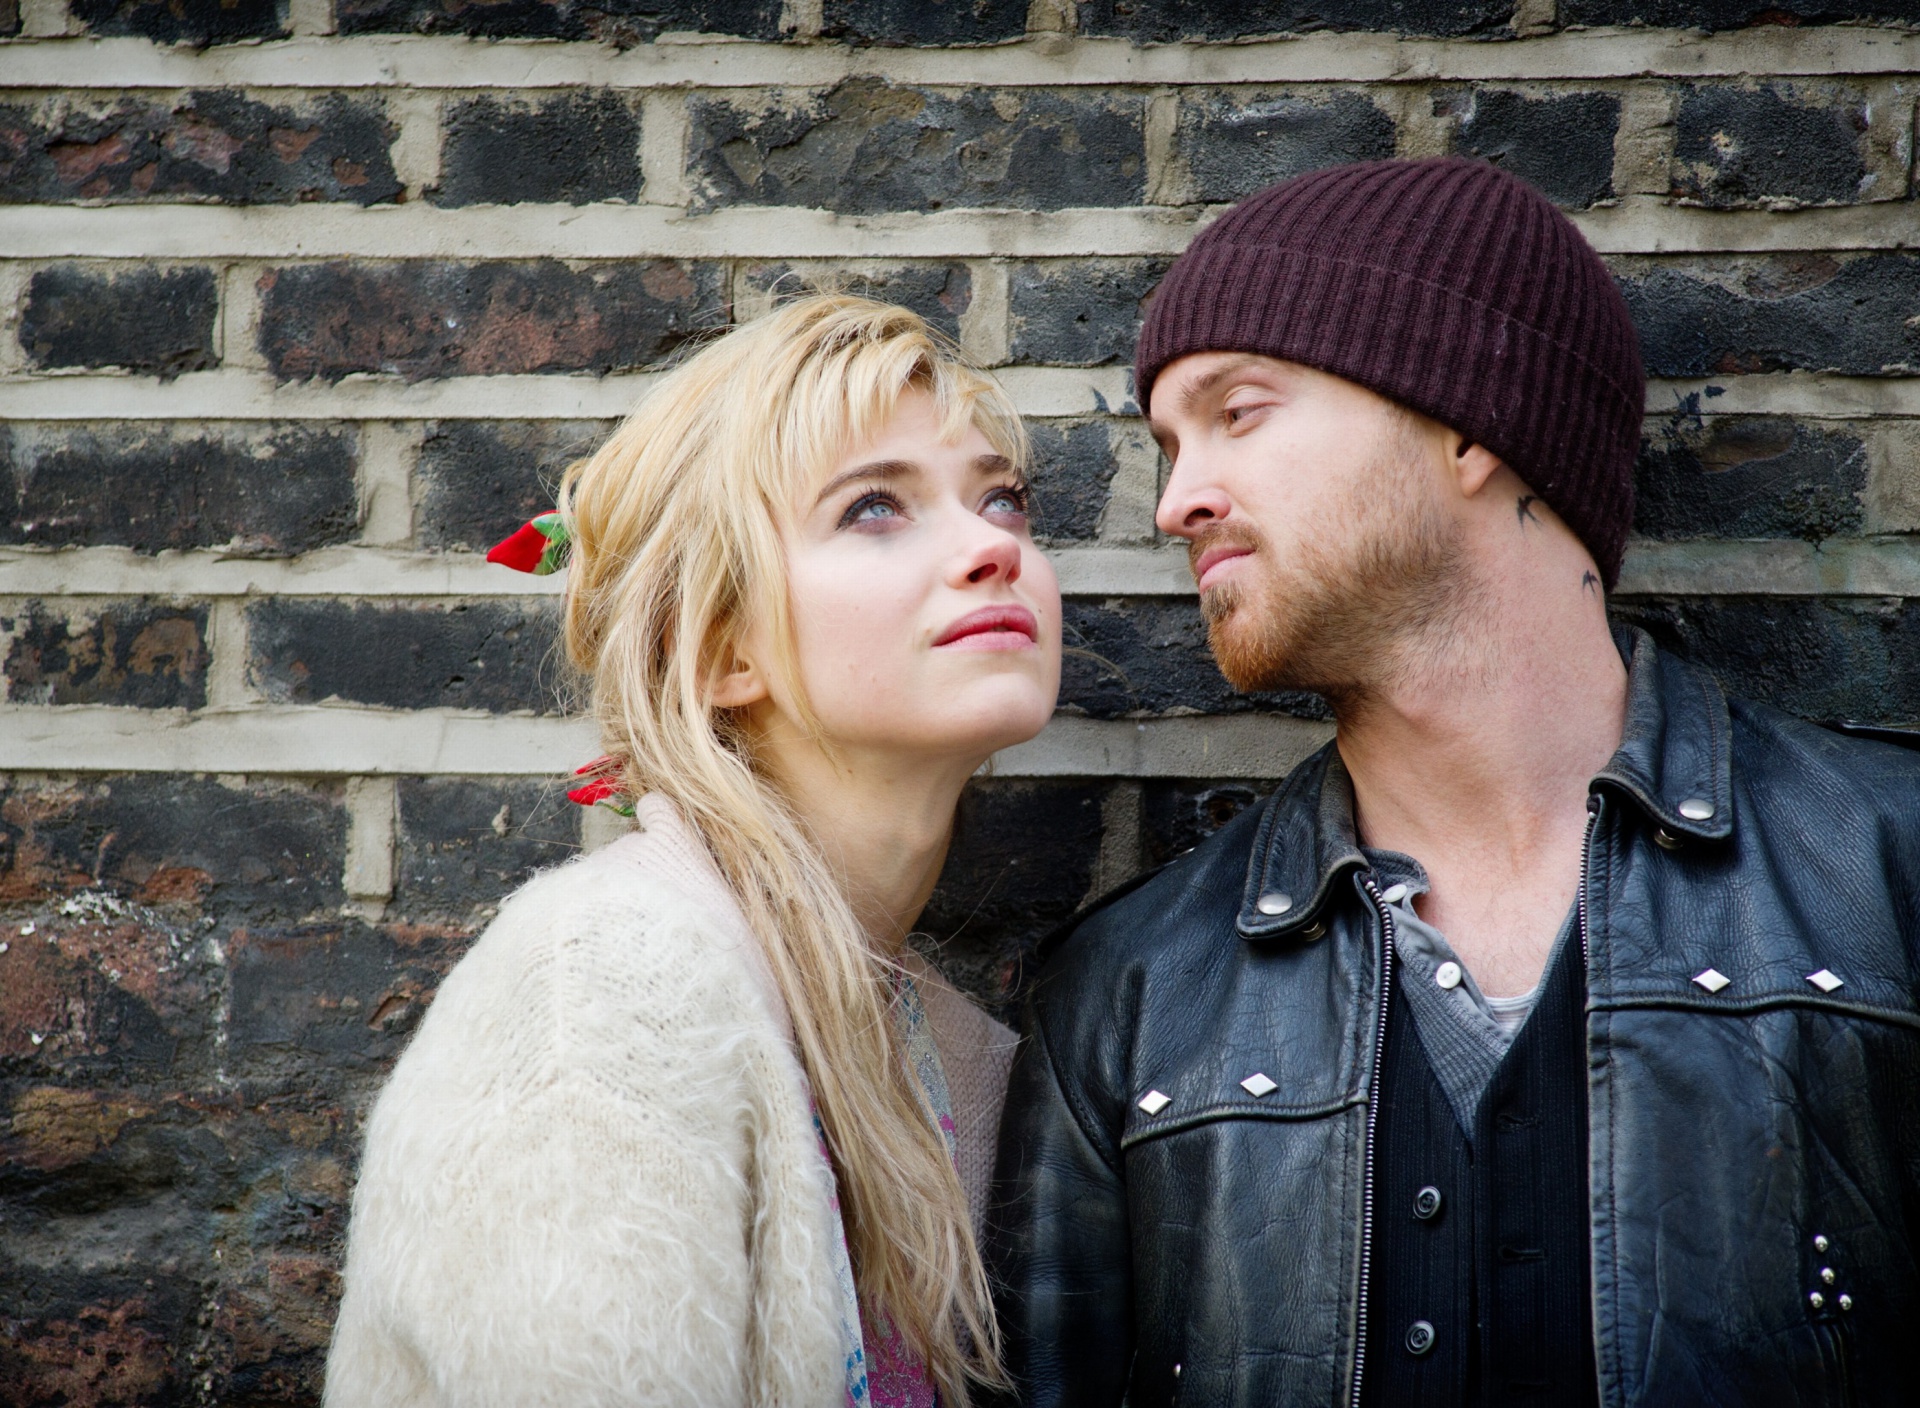 A Long Way Down with Aaron Paul and Imogen Poots wallpaper 1920x1408